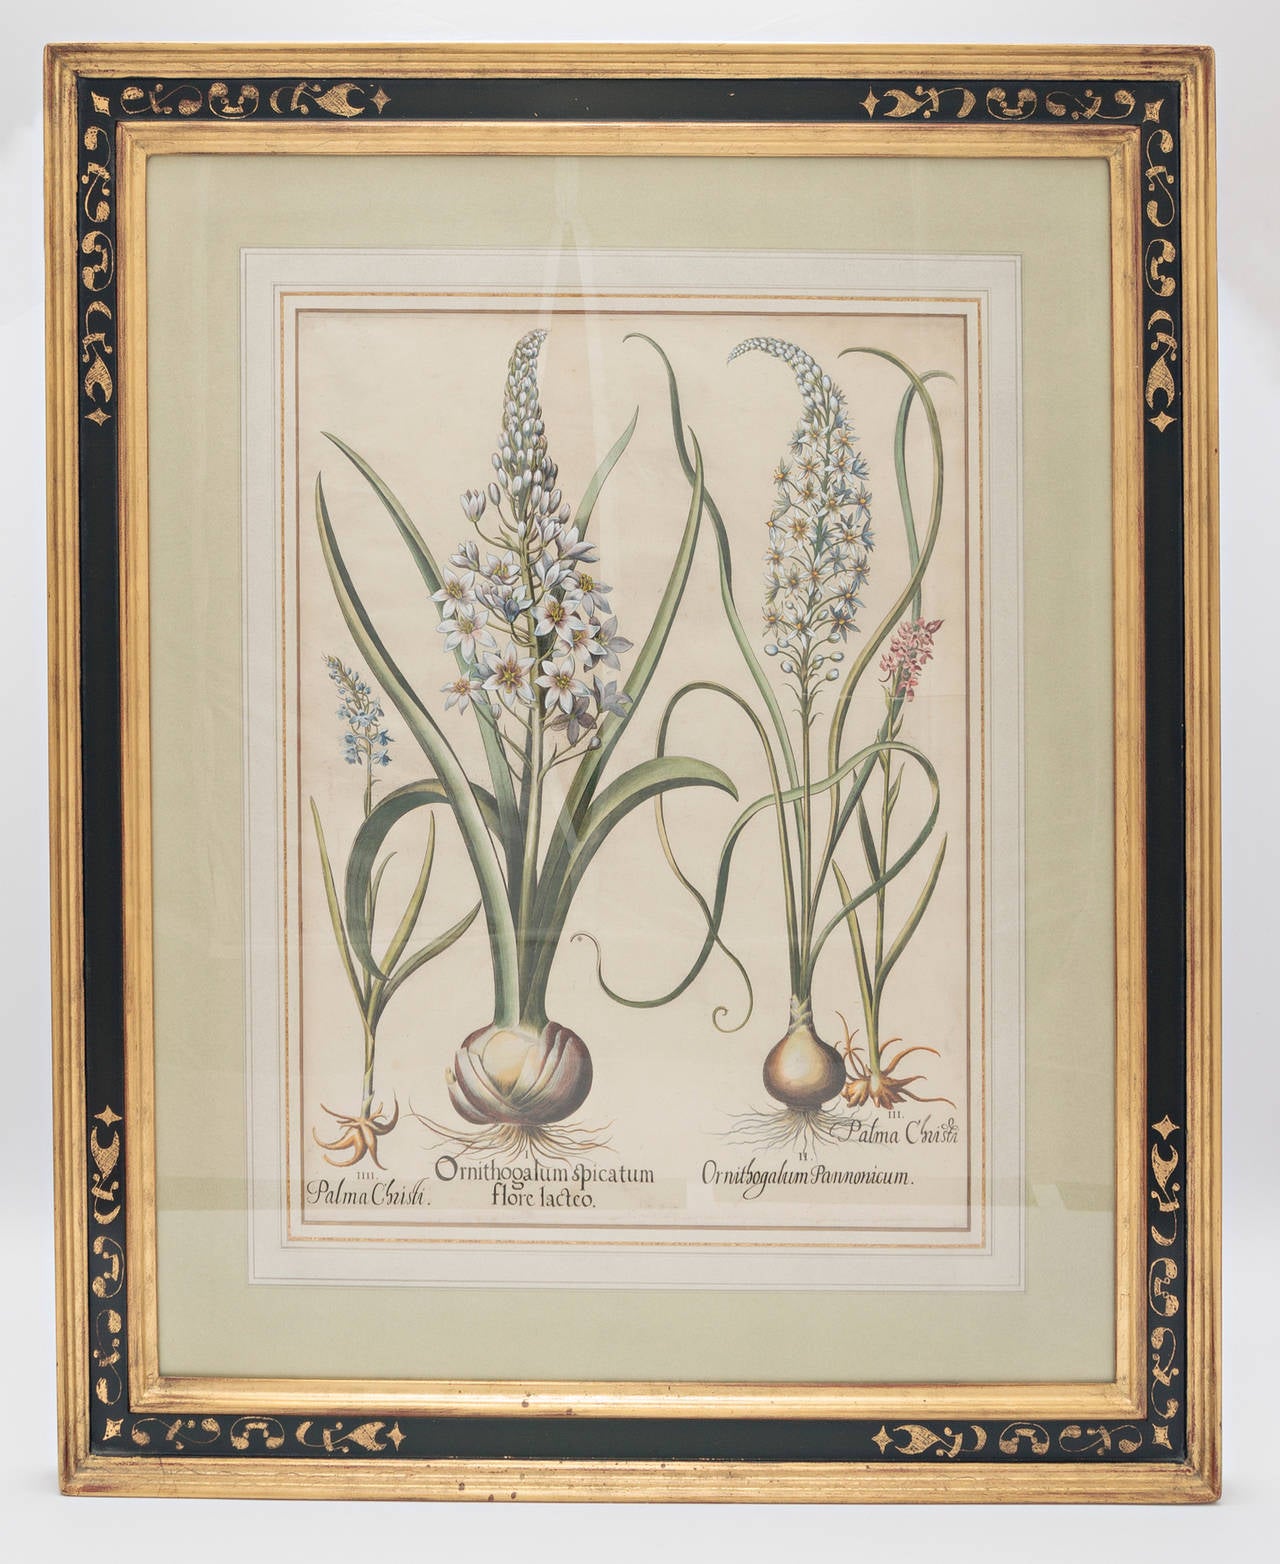 Hortus Eystettensis. Eichstat & Nurnberg, 1613 Basil Besler. Original engraving with later hand-coloring. Acid free custom three color wash French mat with painted gold-leaf bevel in custom black panel frame with extended gold leaf corners and